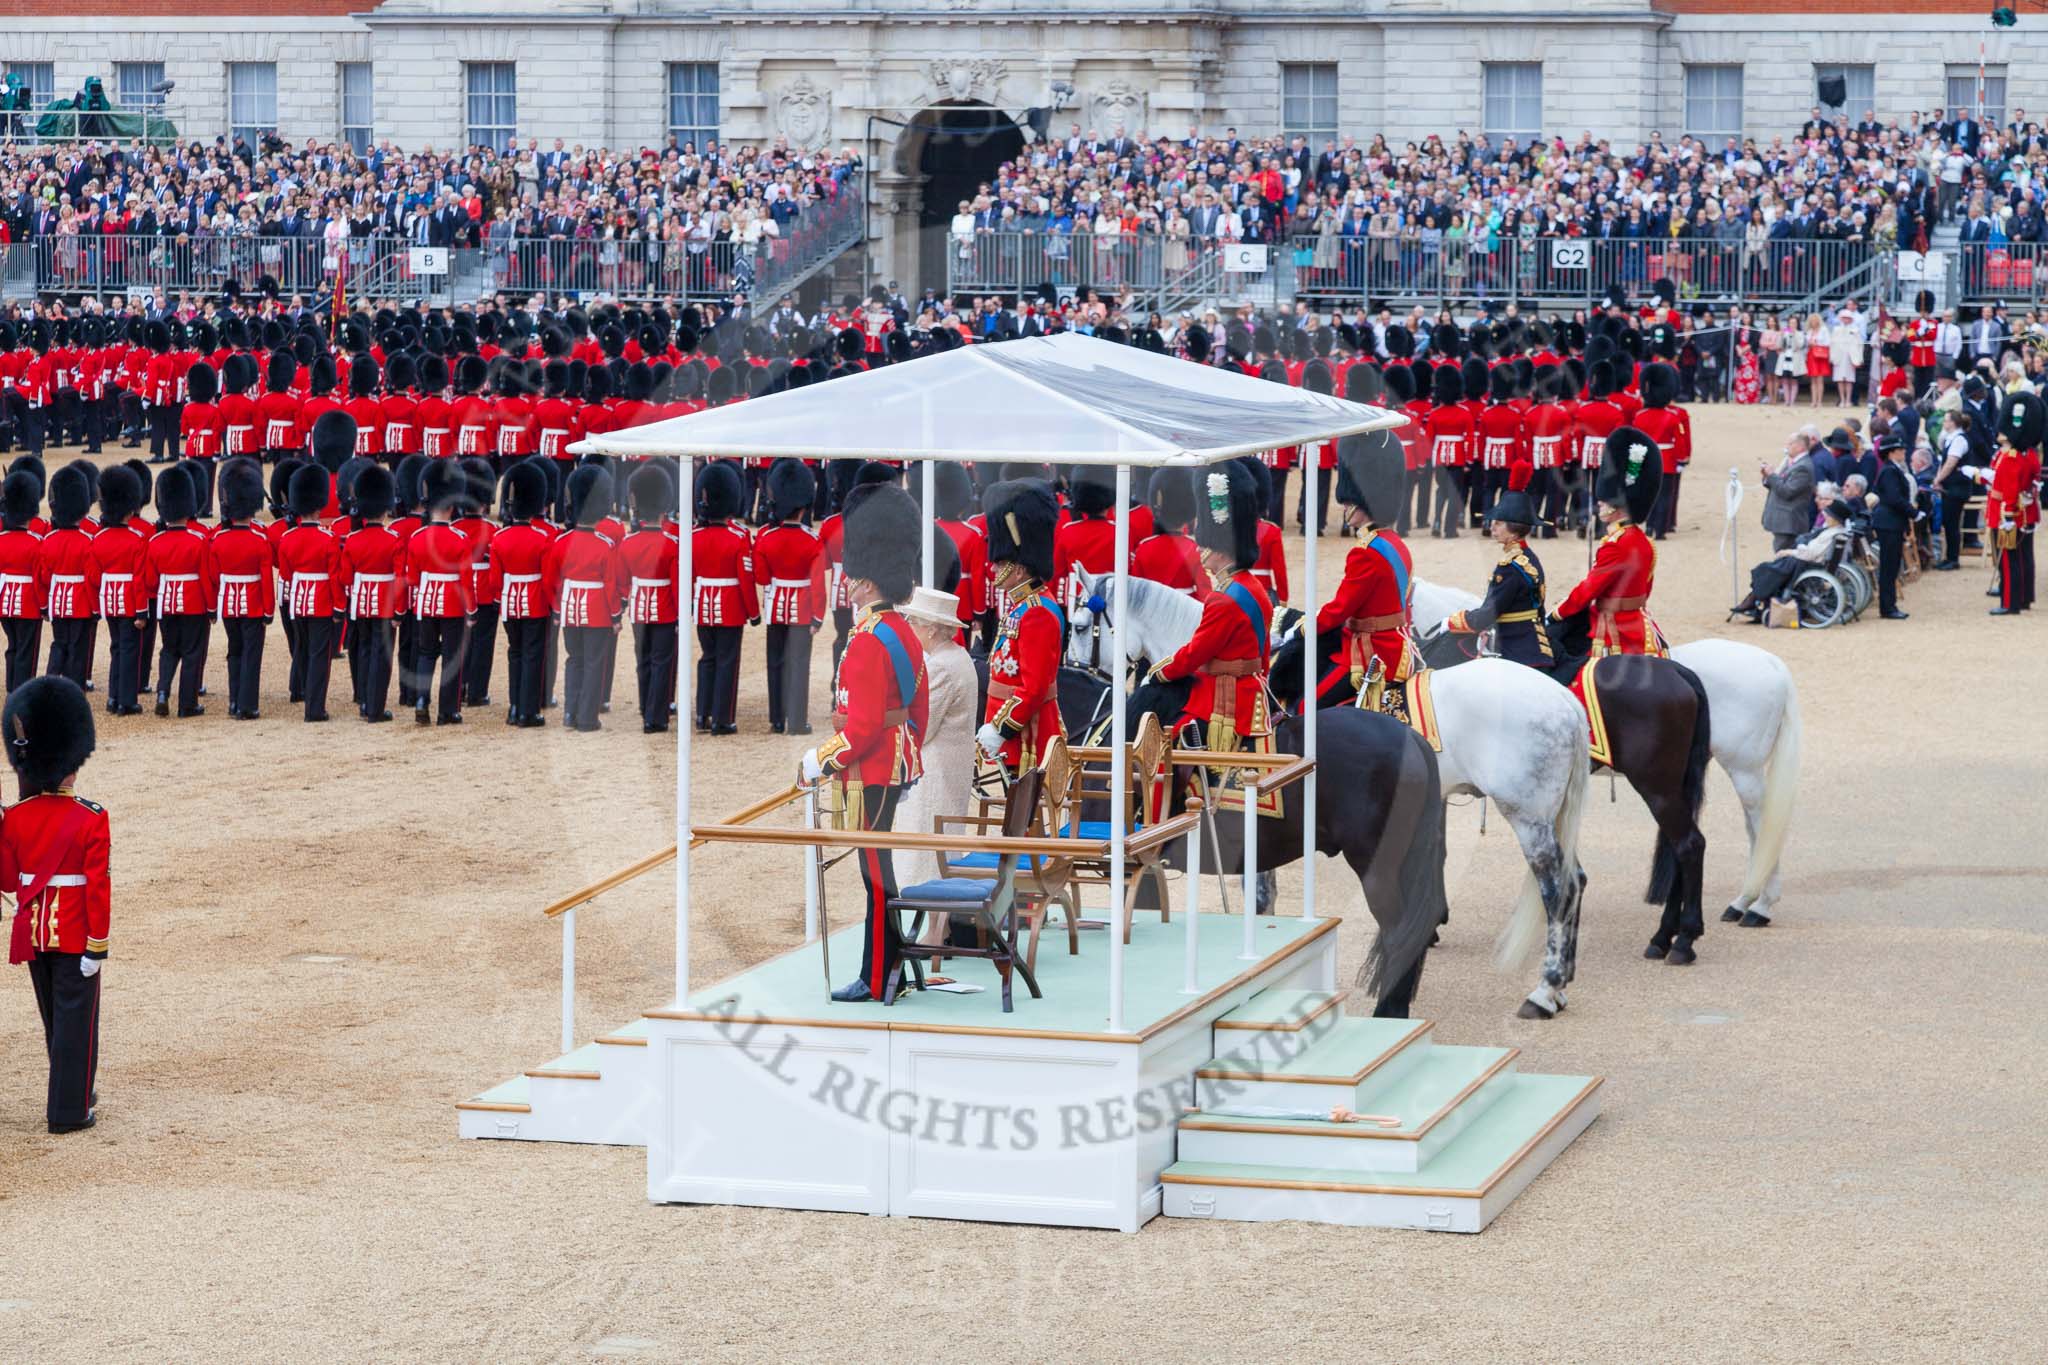 Trooping the Colour 2015. Image #470, 13 June 2015 11:37 Horse Guards Parade, London, UK